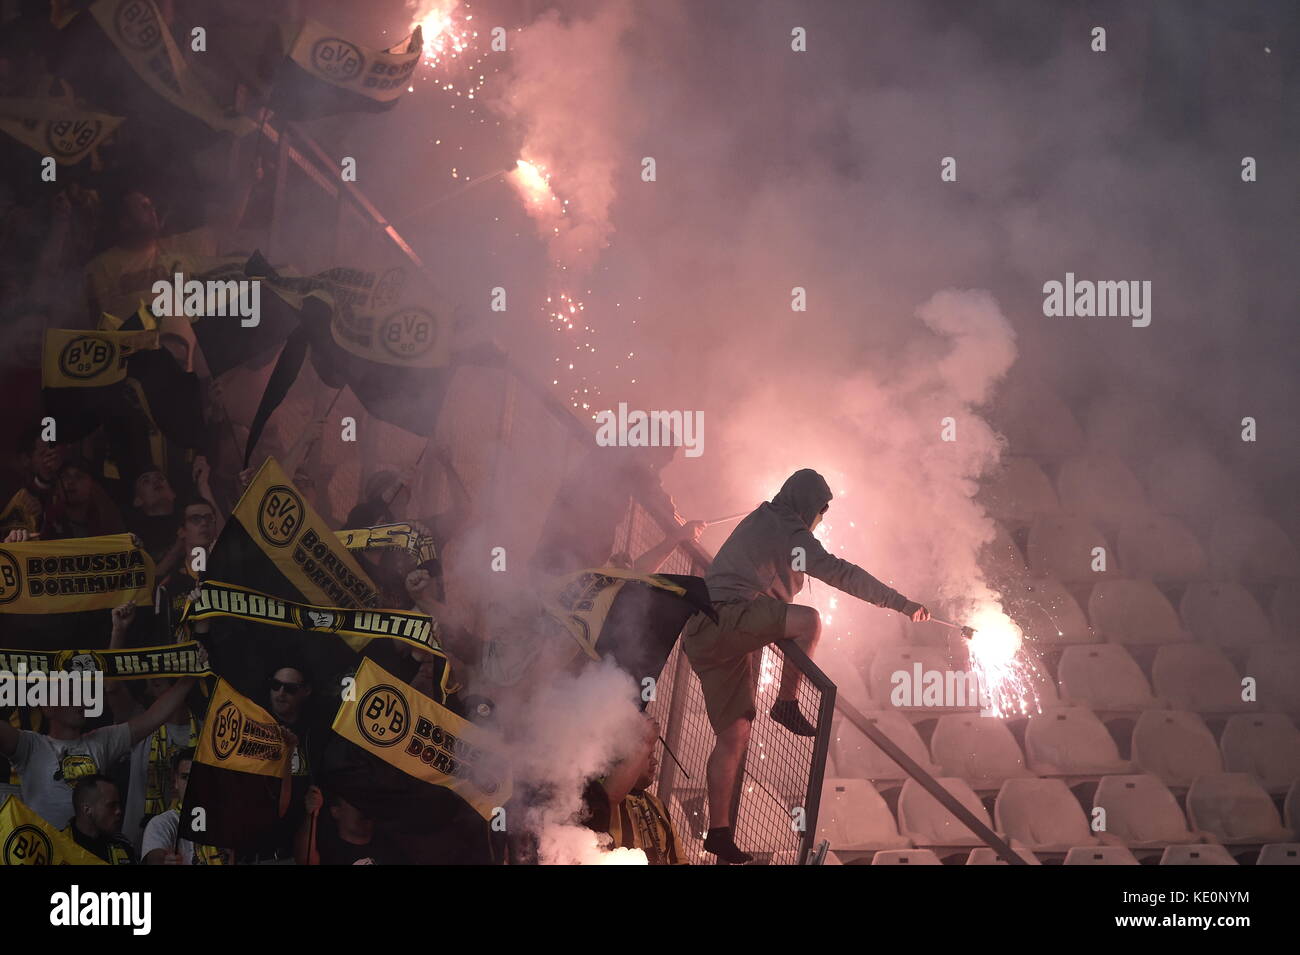 Nicosia, Cyprus. 17th Oct, 2017. Dortmund fans light fireworks in the stands during the Champions League group stages qualification match between APOEL Nicosia and Borussia Dortmund in the GSP Stadium in Nicosia, Cyprus, 17 October 2017. Credit: Angelos Tzortzinis/dpa/Alamy Live News Stock Photo